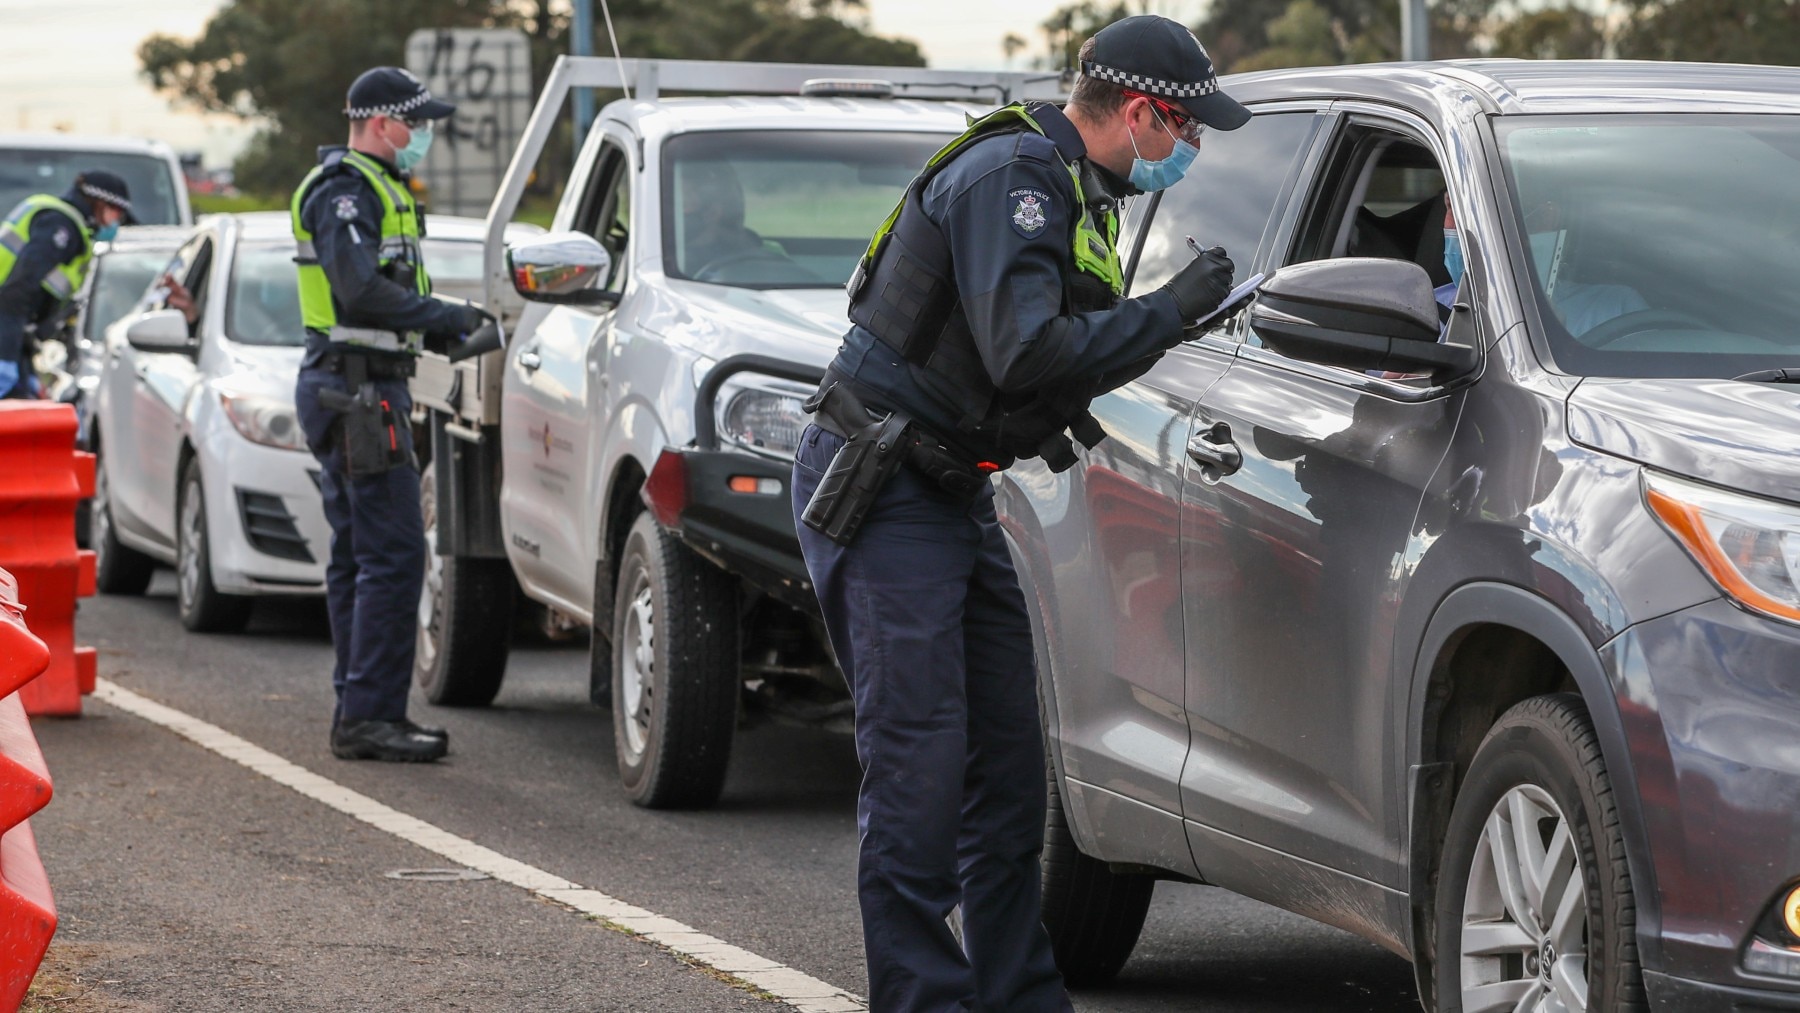 Police check permits and ID of drivers at a checkpoint in Victoria.